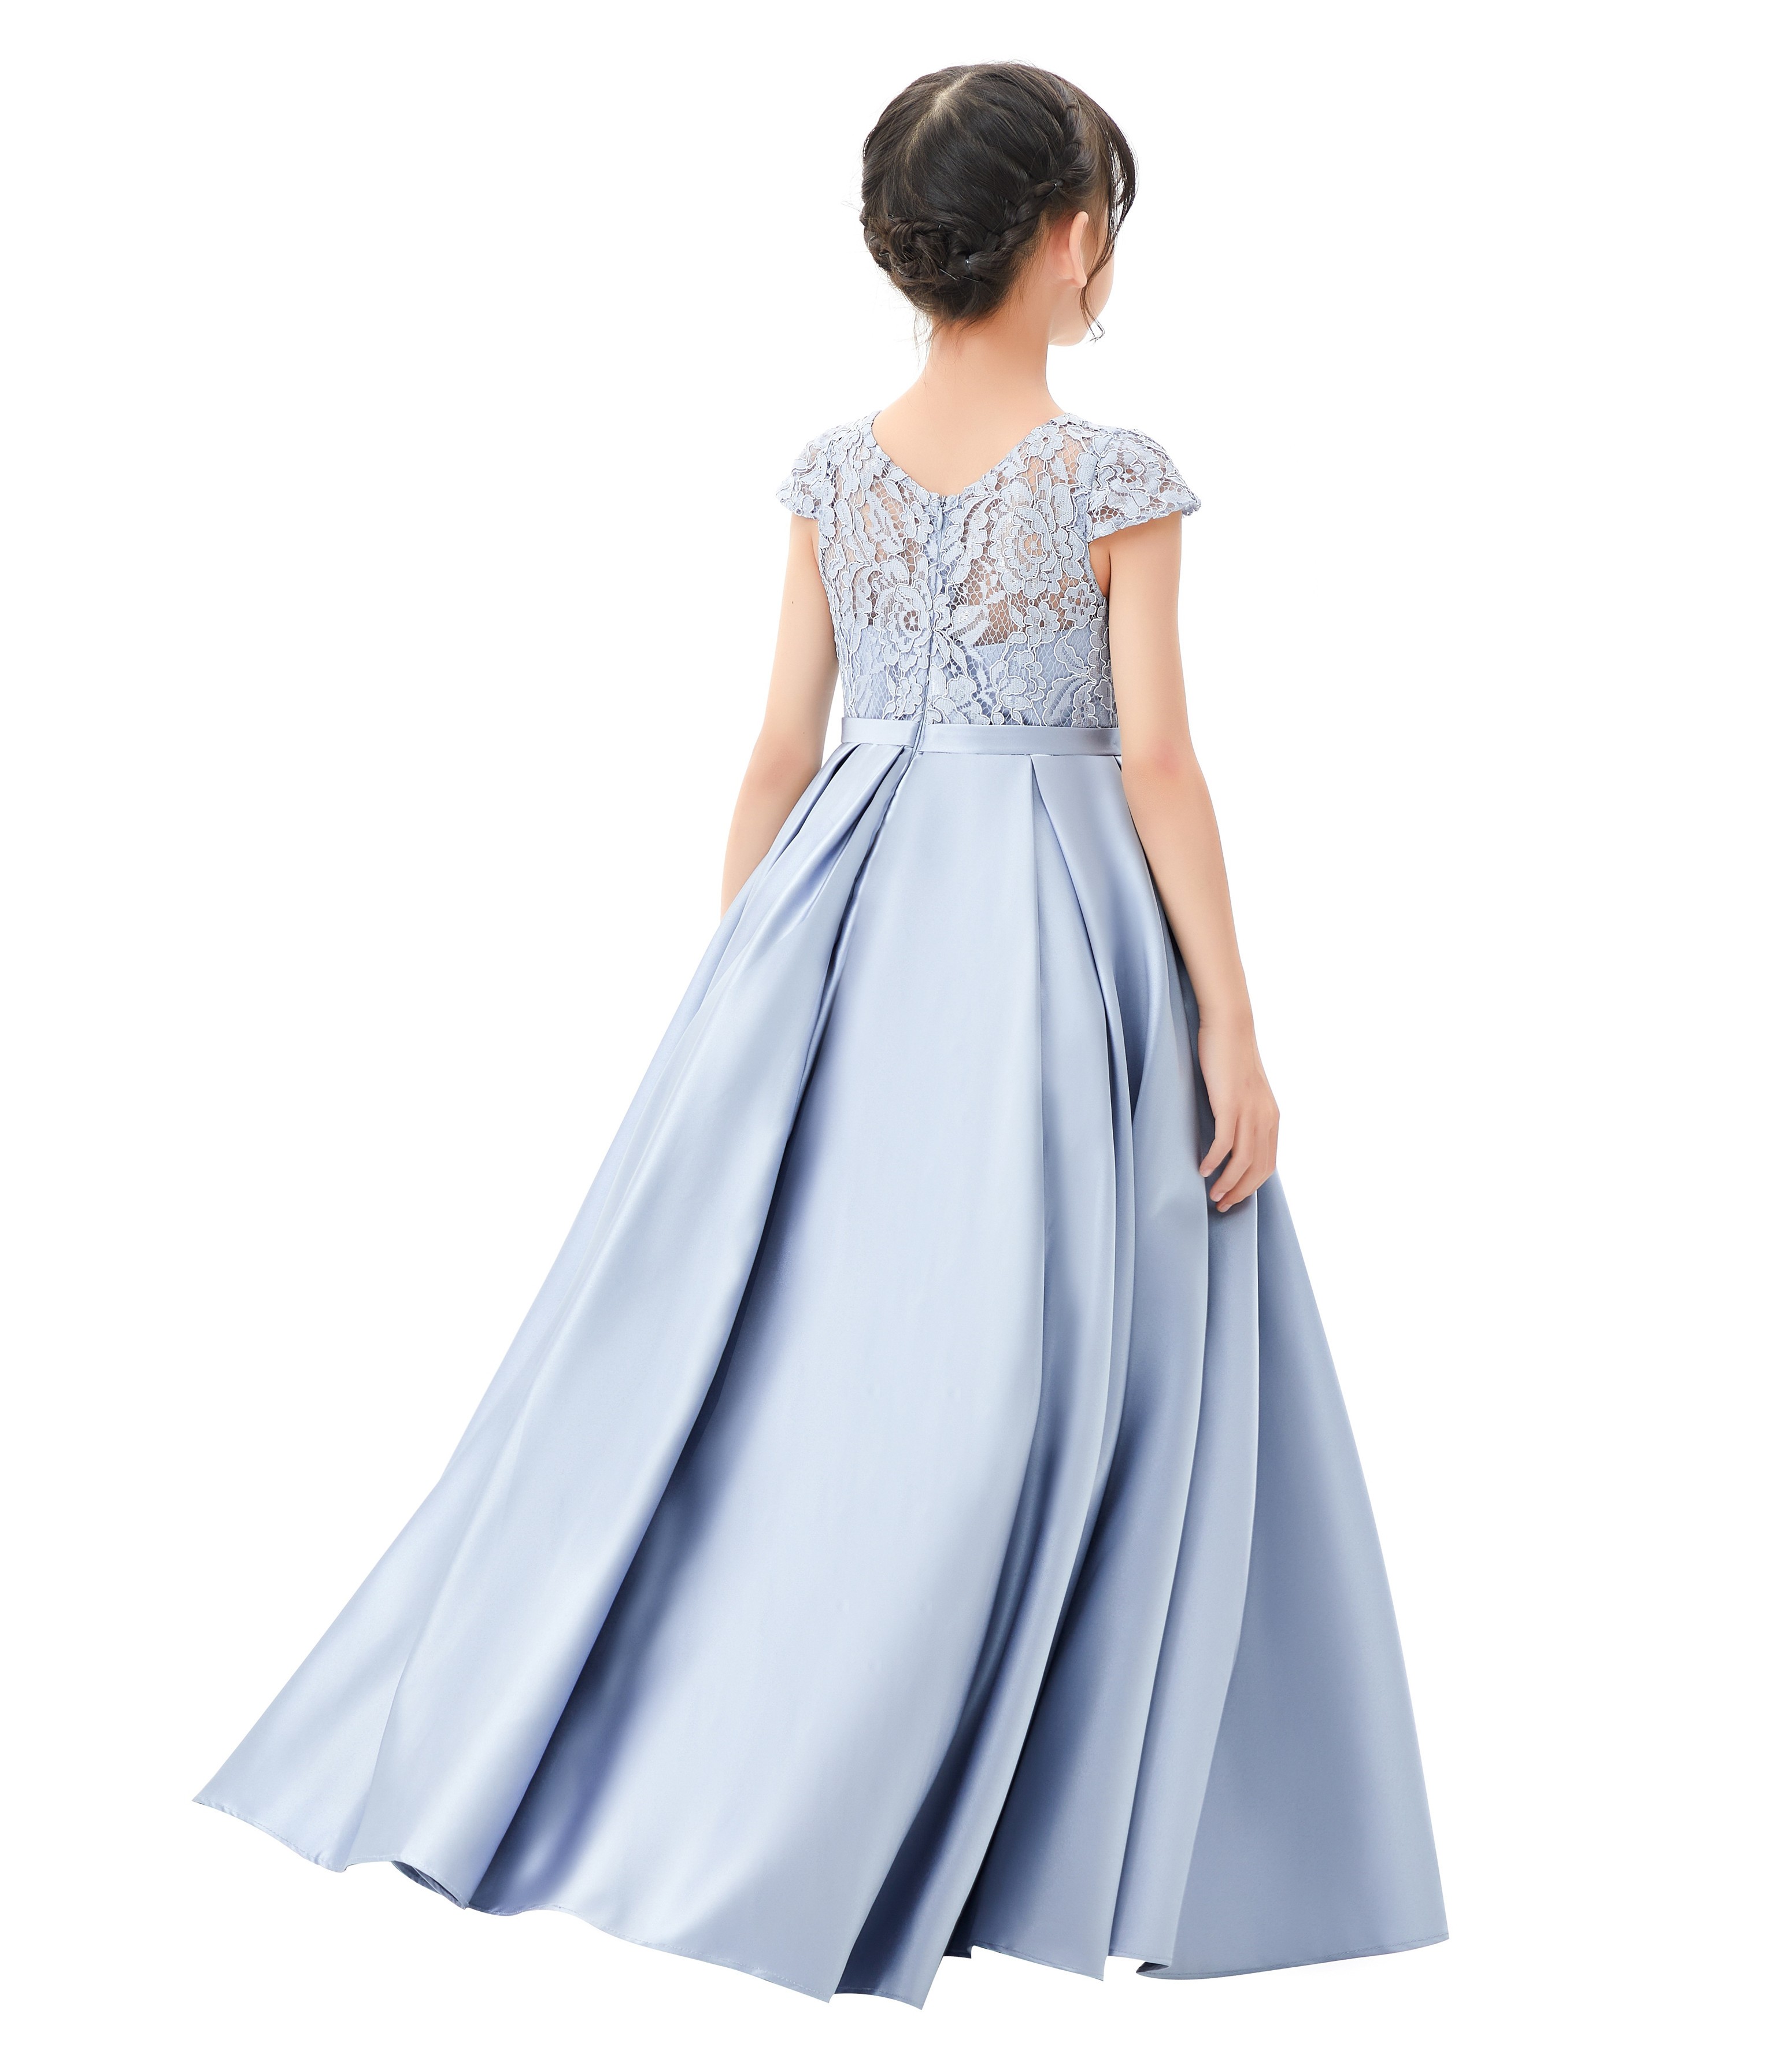 Dusty Blue Lace Flower Girl Dress Illusion Lace Dress Cap Sleeves L246